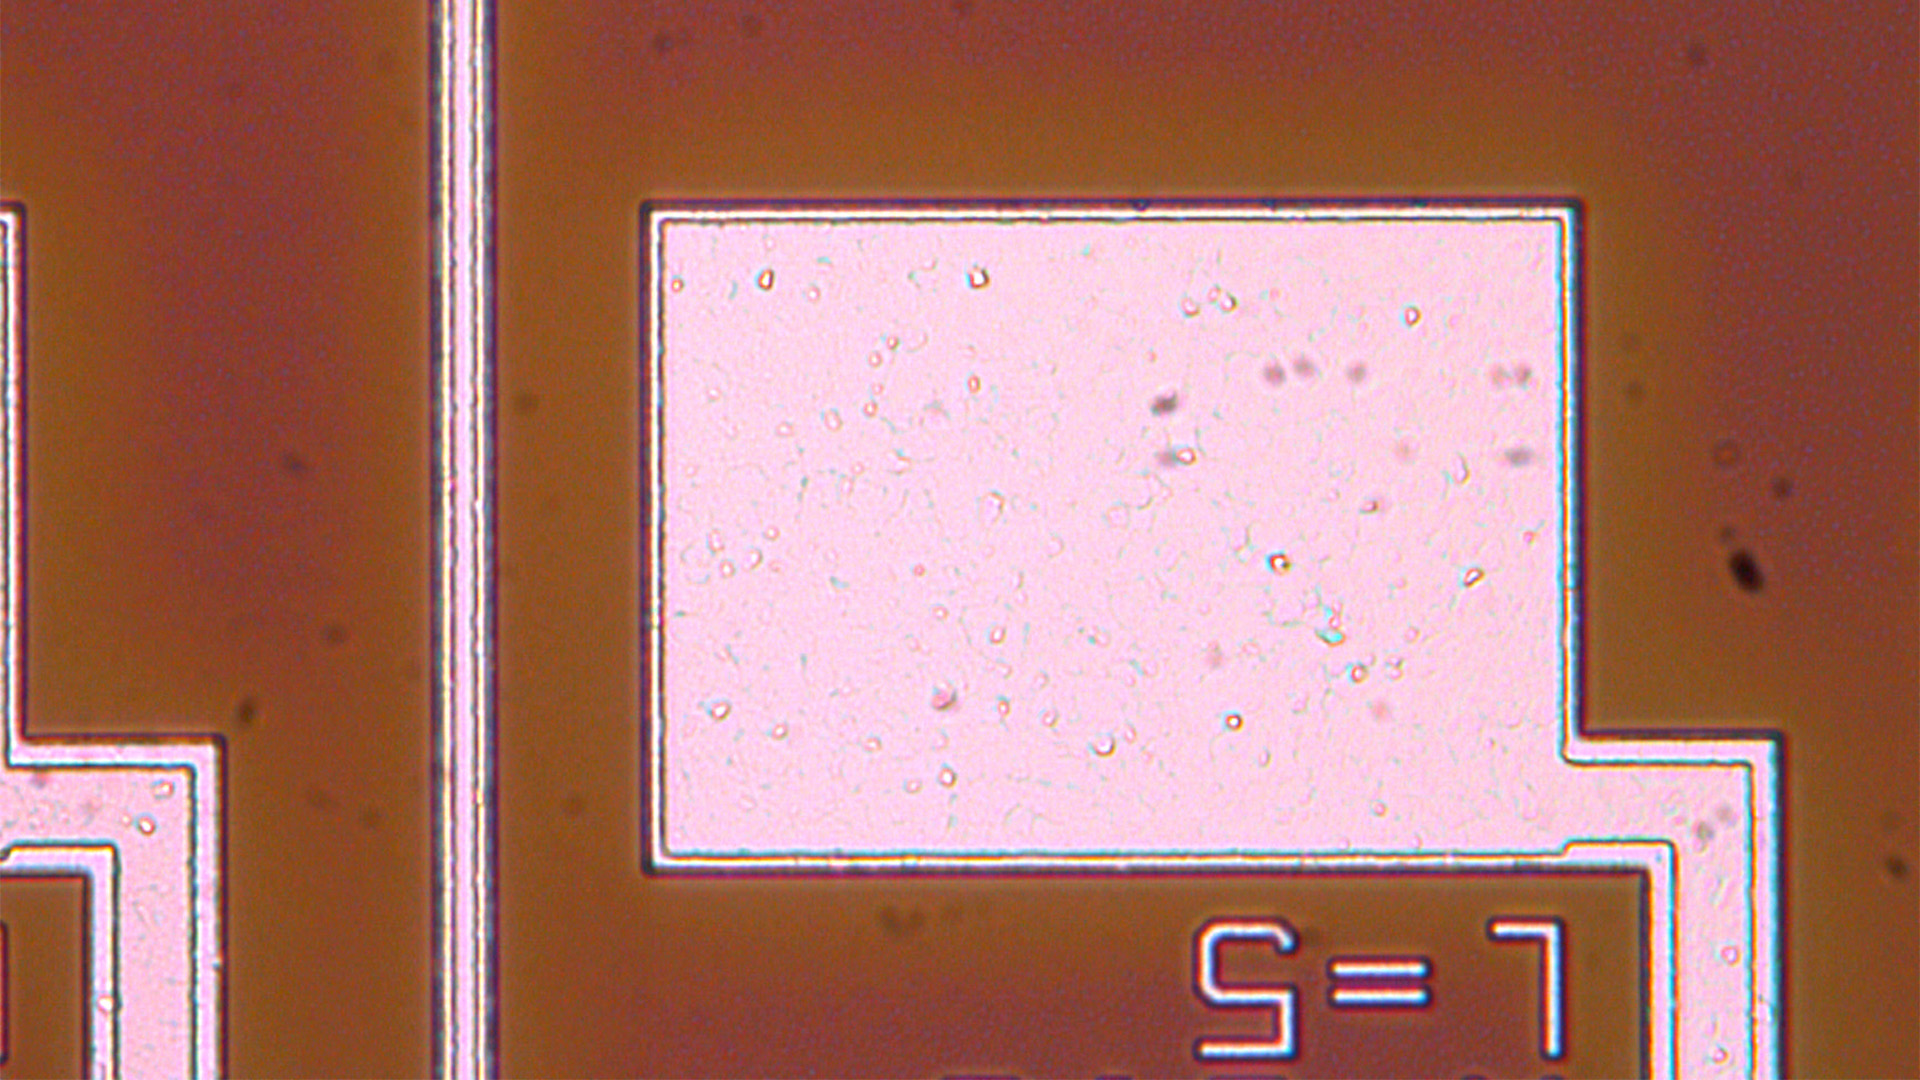 Inspection of a semiconductor patterned with integrated circuits (ICs). Image of a region acquired with optical microscopy and brightfield illumination. 